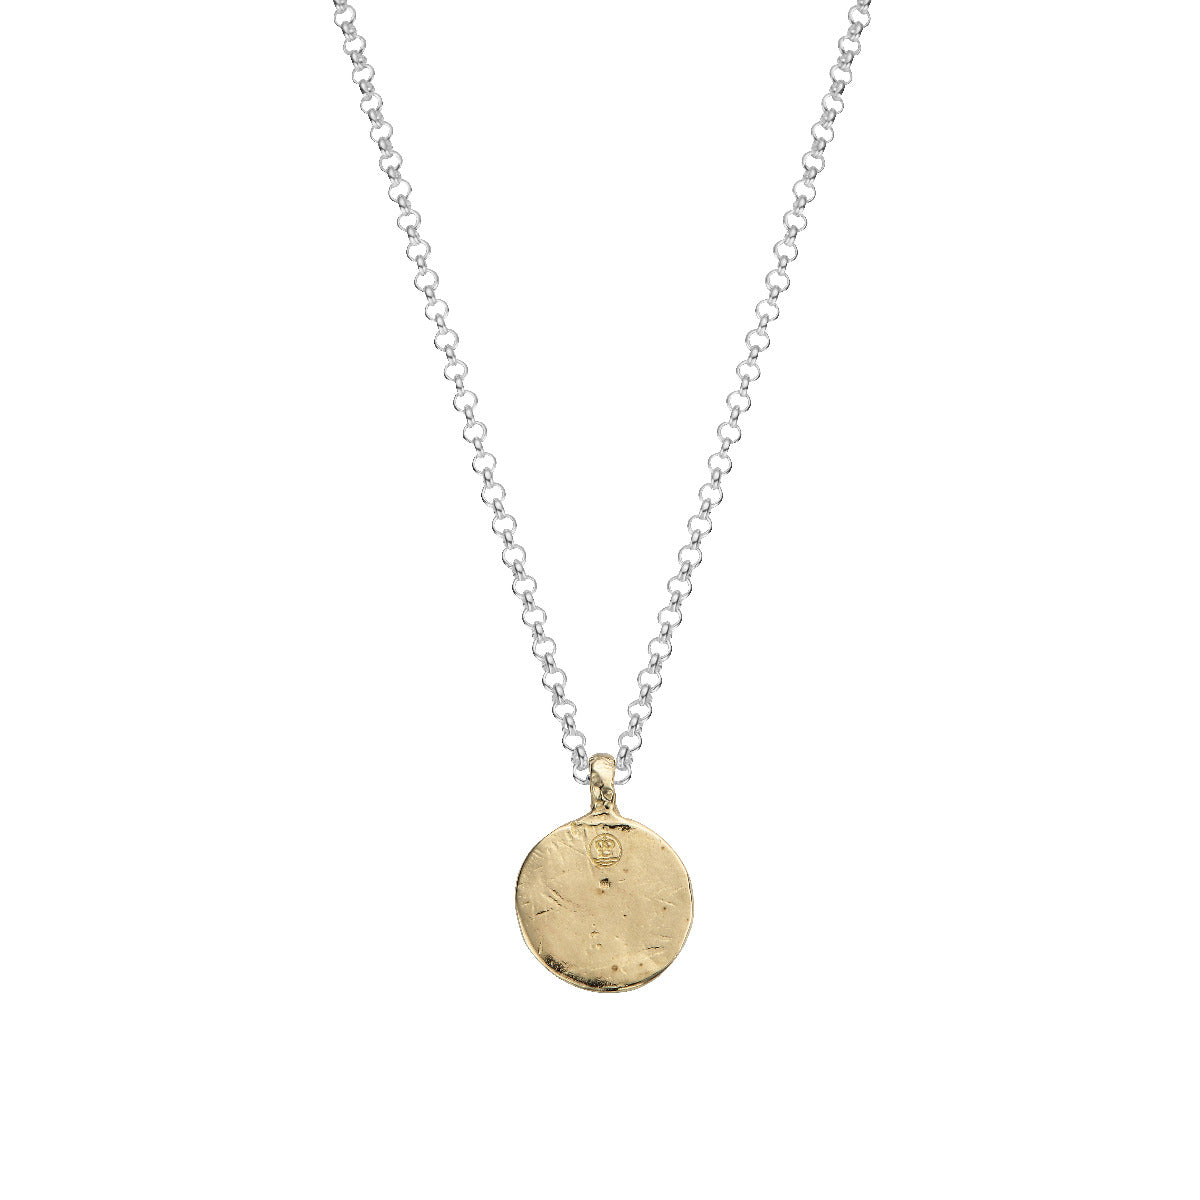 Silver & Gold Medium St Christopher Necklace